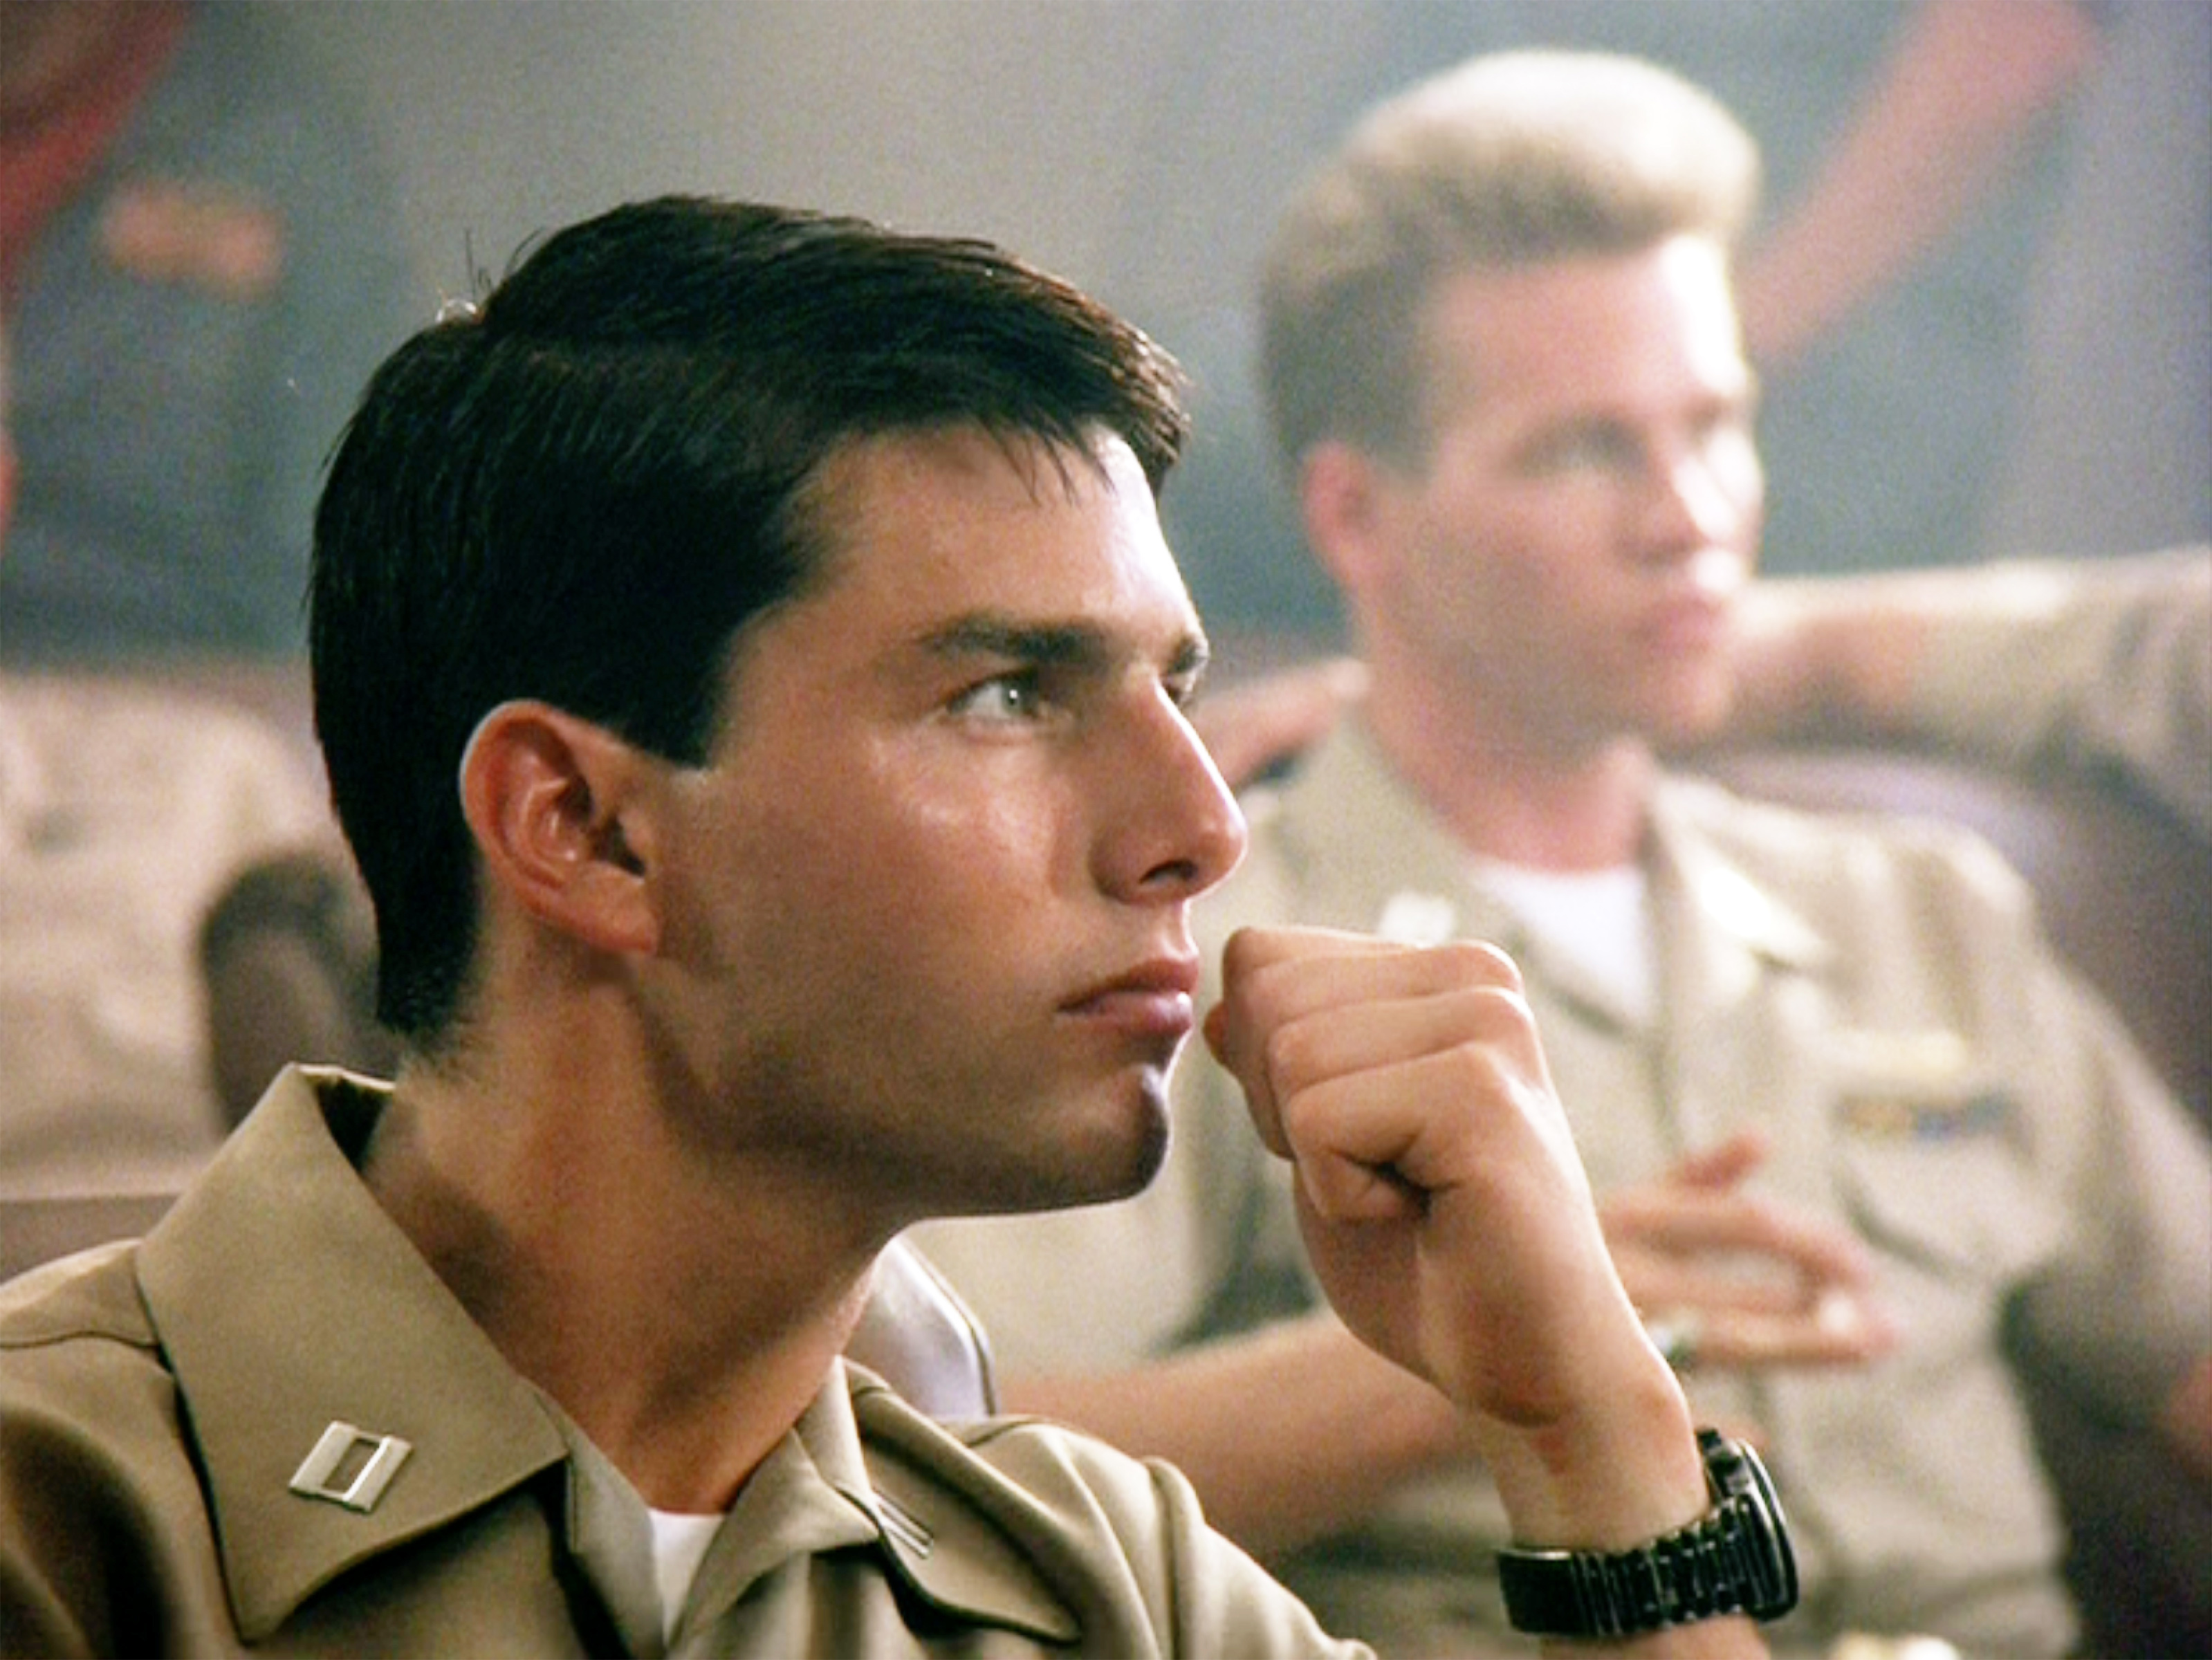 Tom Cruise as Lt. Pete "Maverick" Mitchell and Val Kilmer as Lt. Tom 'Iceman' Kazansky (background) in the movie, "Top Gun," circa 1986 | Source: Getty Images